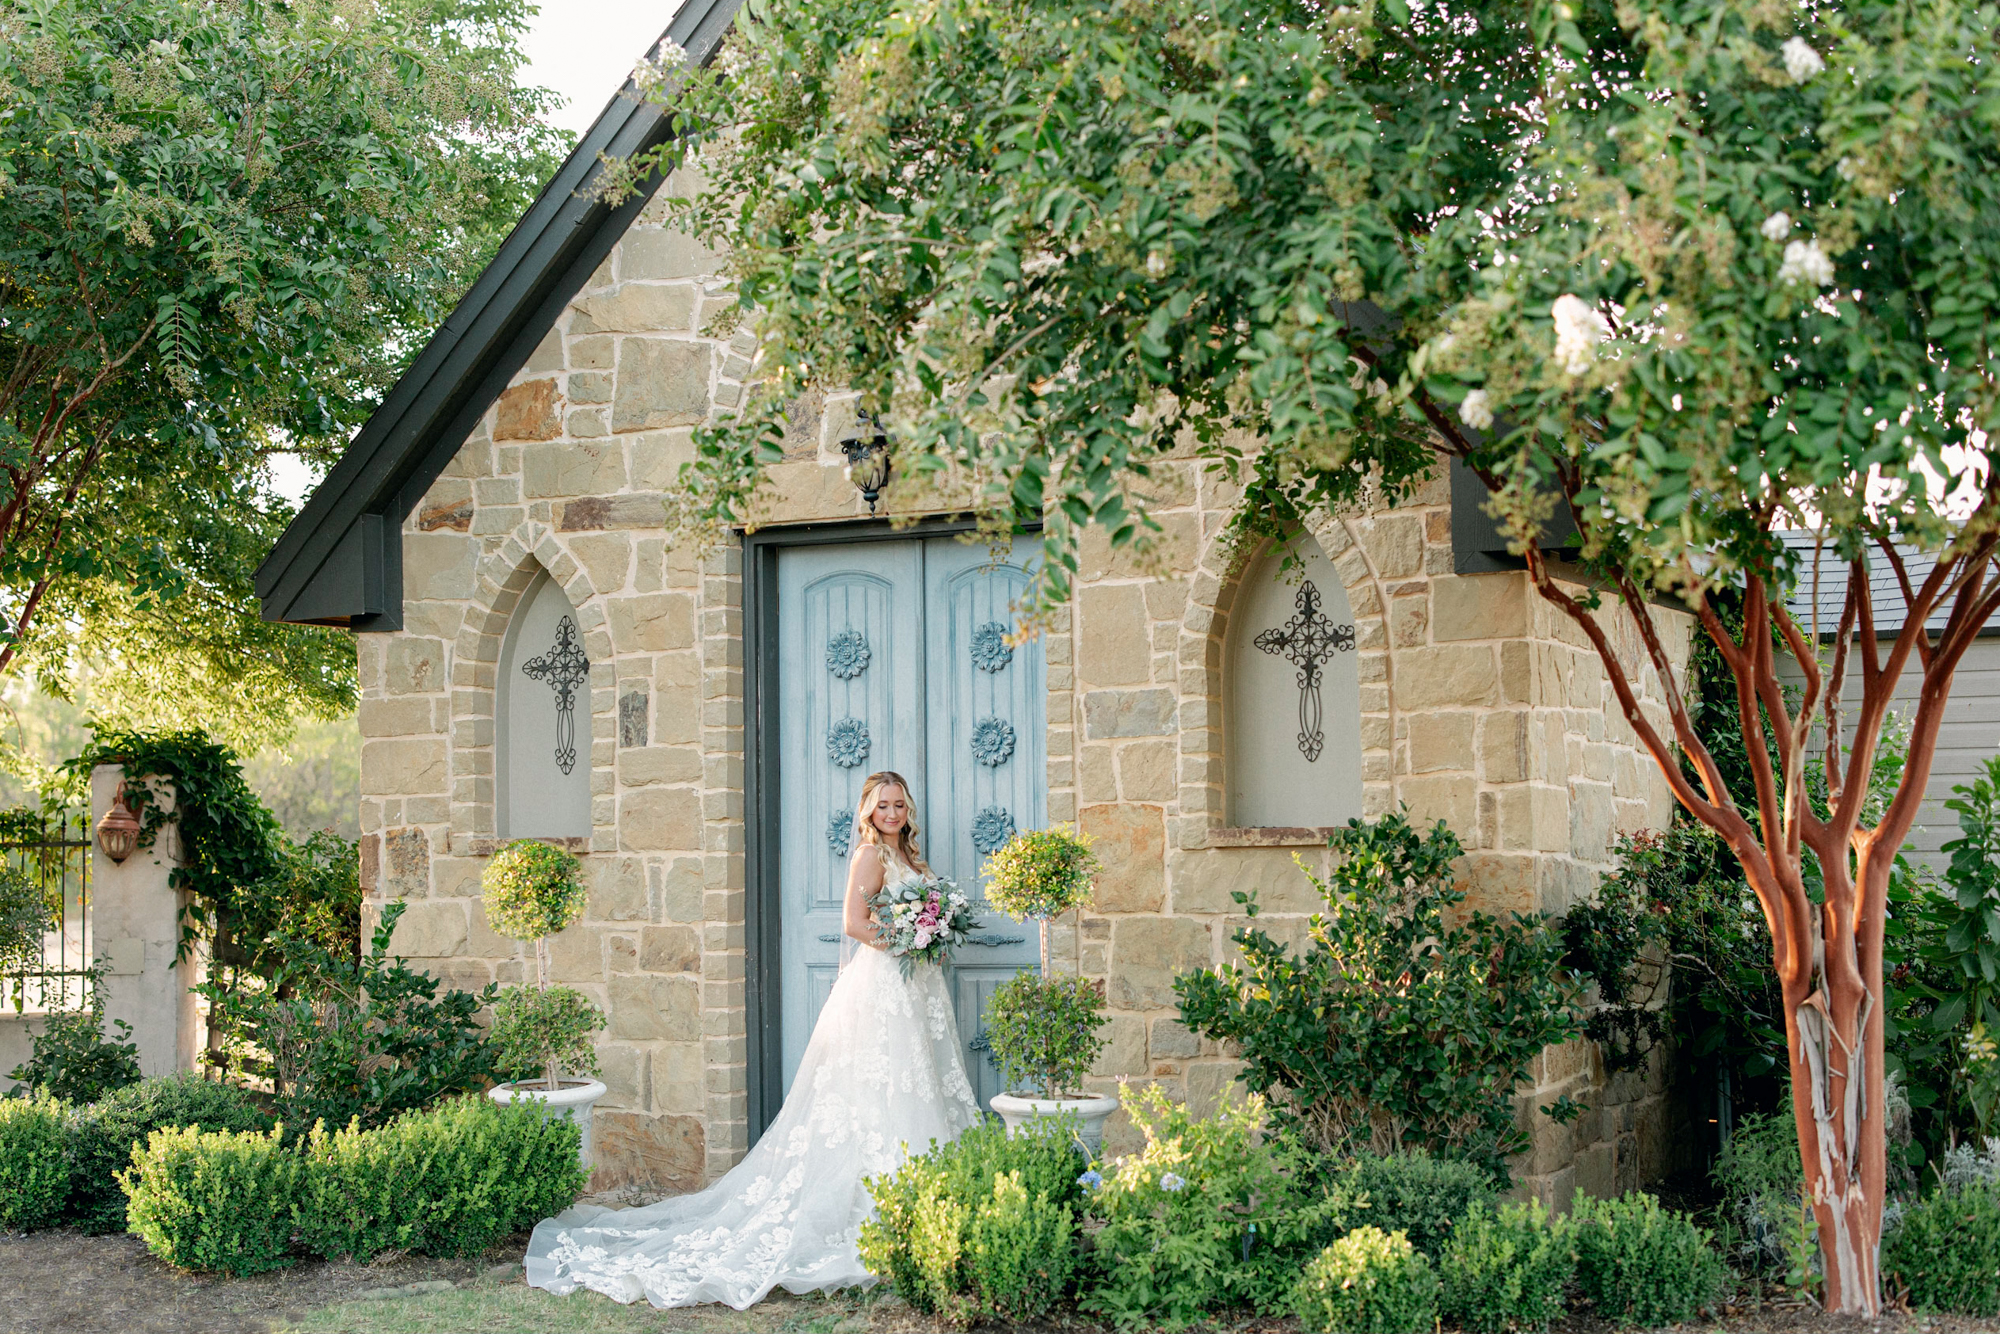 Bride in courtyard during bridal session by blue door at Thistlewood Manor and Gardens